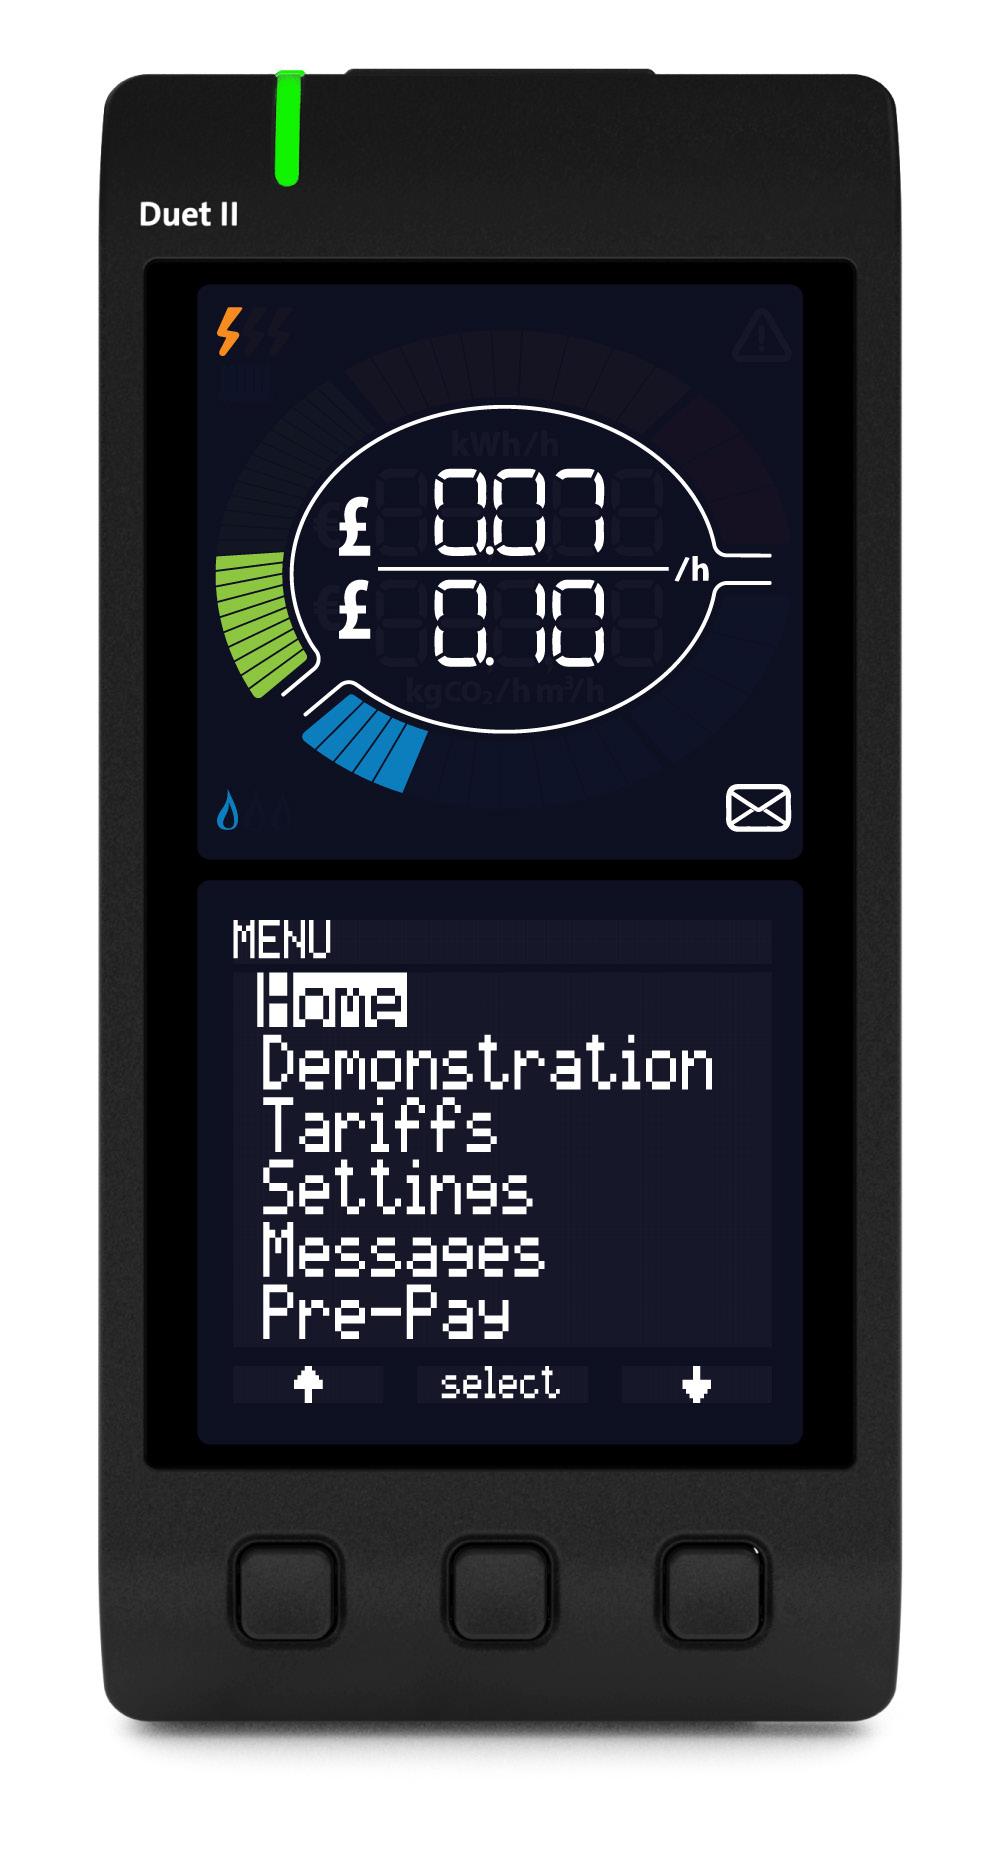 Your Duet II display Display overview Electricity tariff warning Home button Electricity tariff icons Electricity consumption Gas